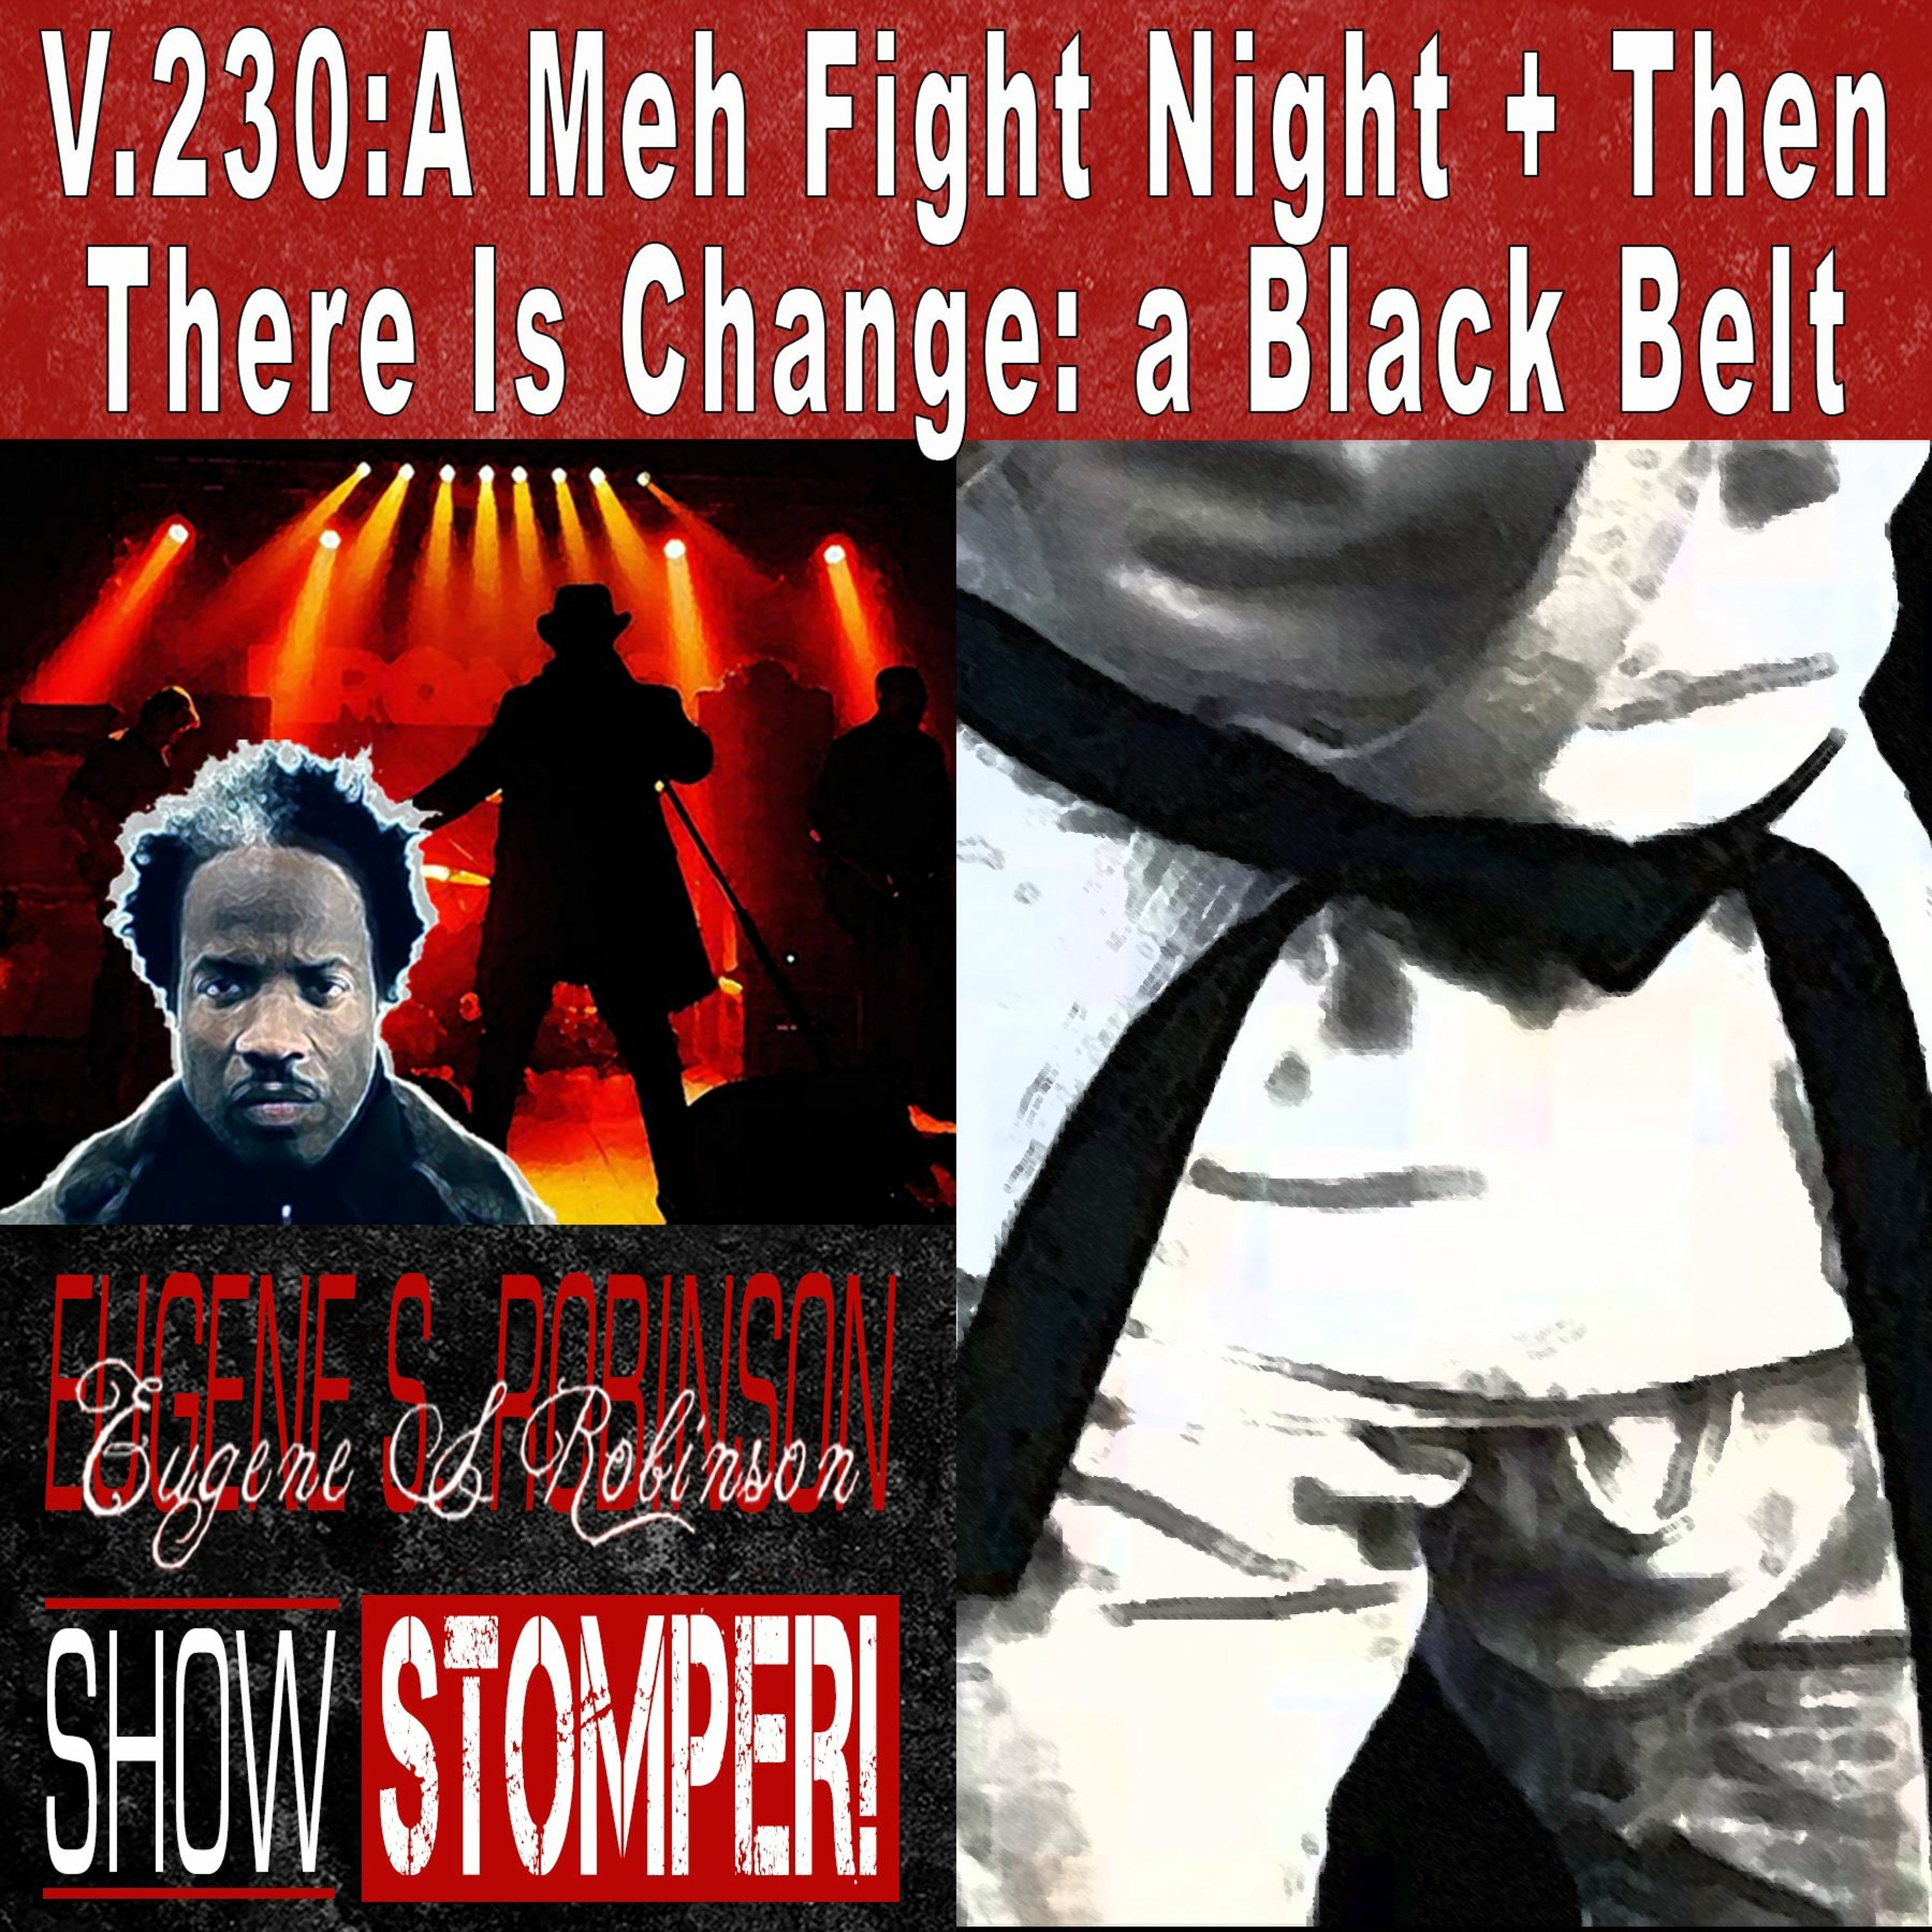 V.230: A Meh Fight Night+Then There Is Change: a Black Belt On The Eugene S. Robinson Show Stomper!